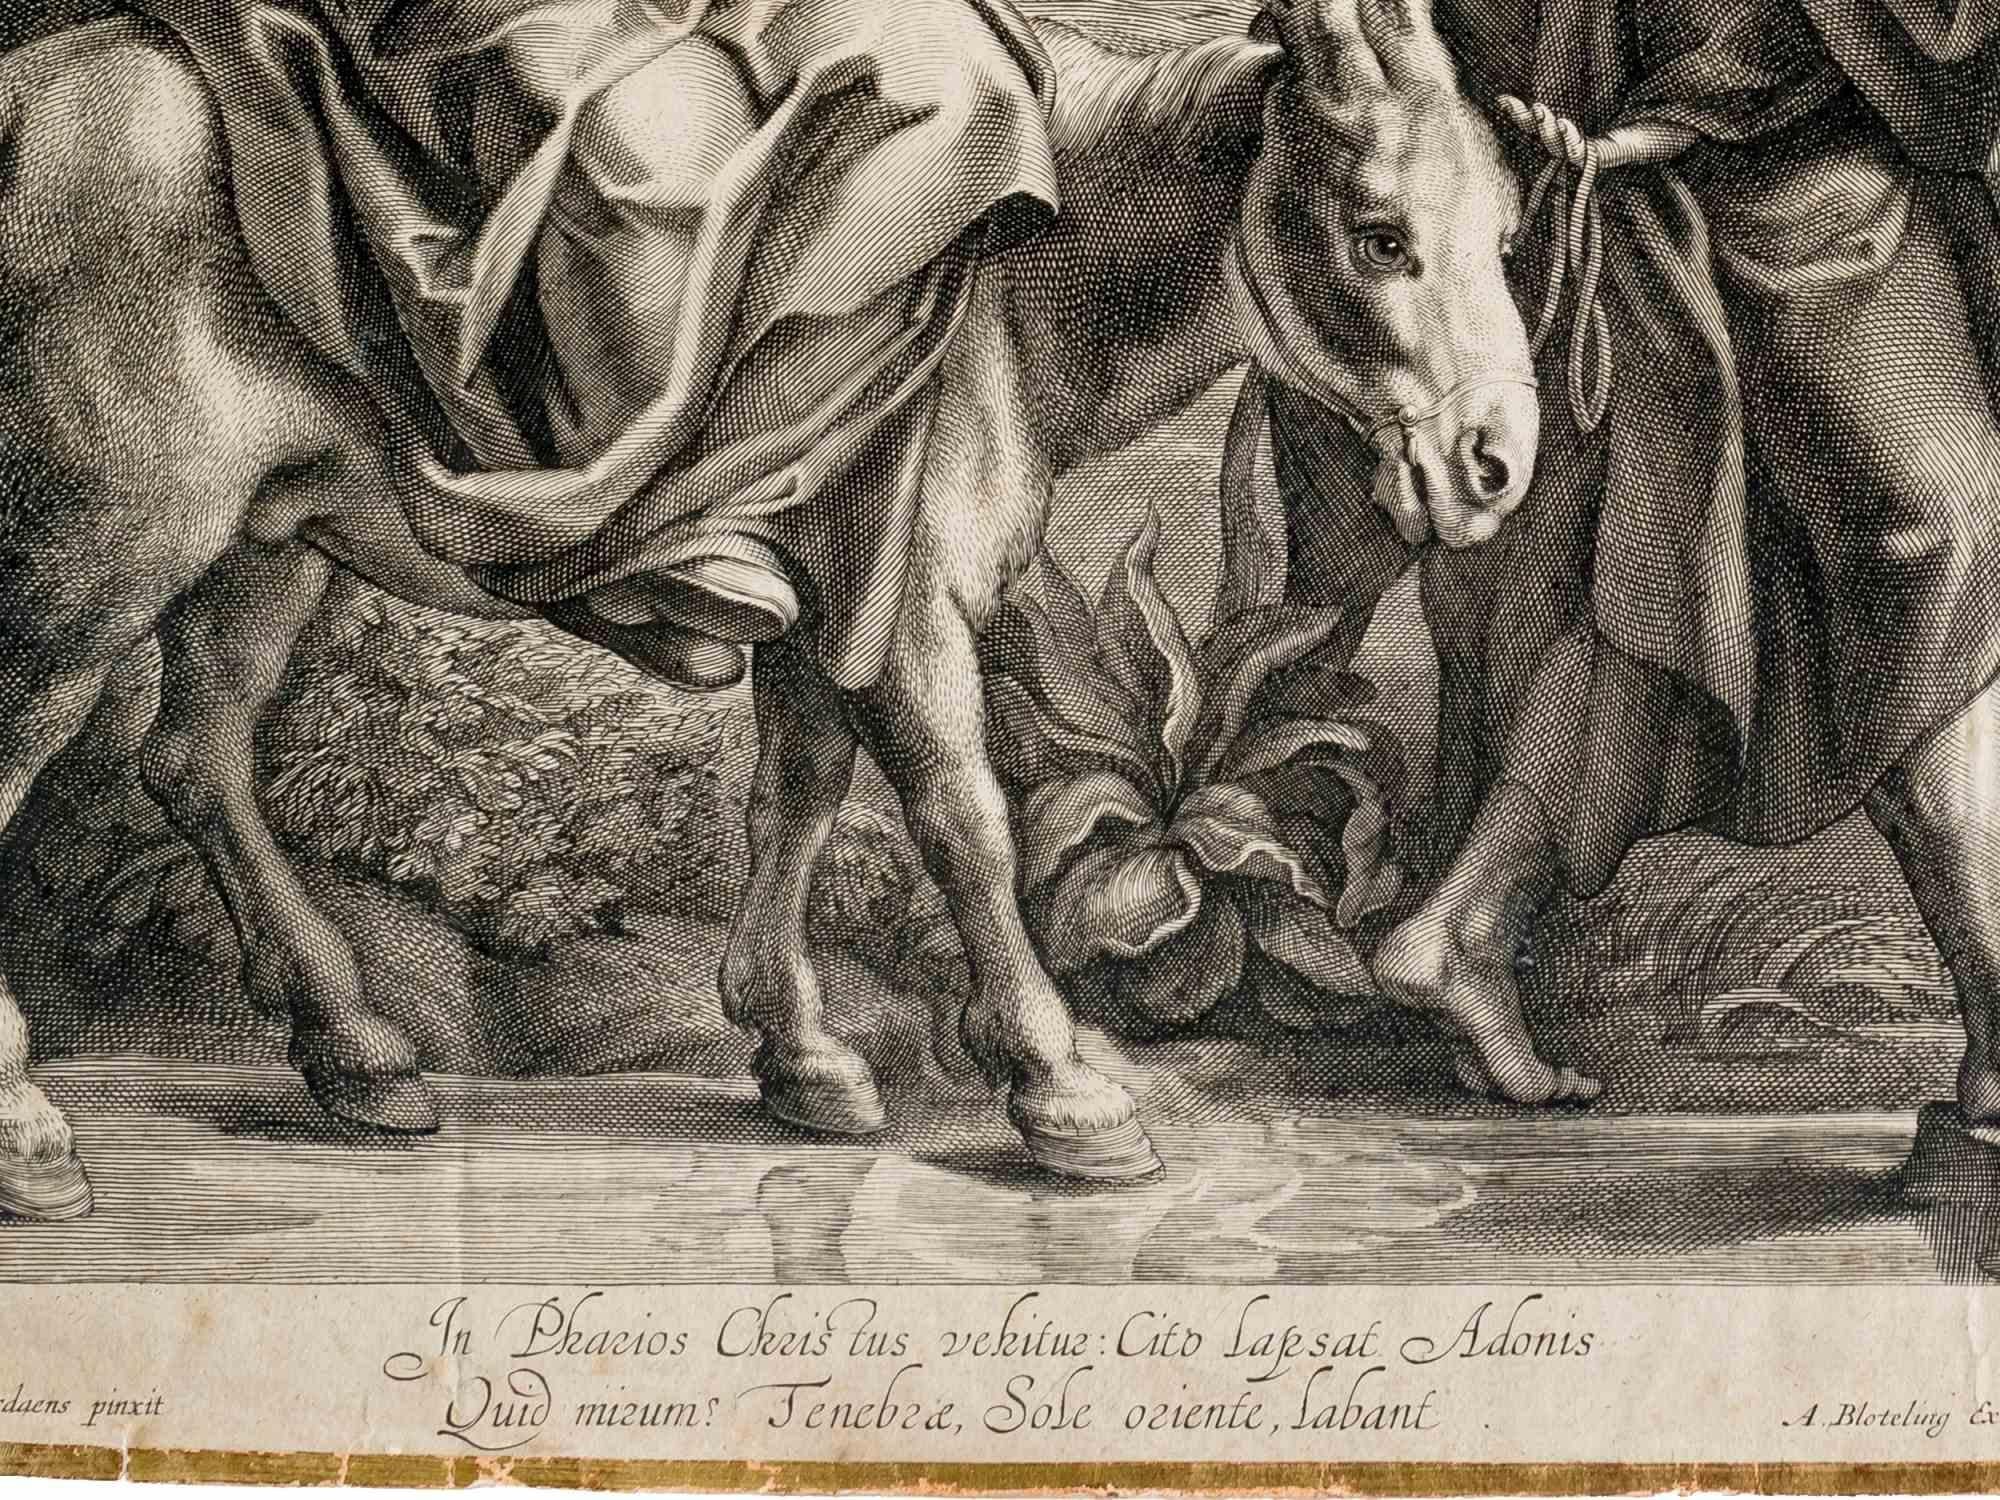 Christ and the Samaritan woman at the well is anold master artwork realized in 17th Century.

Black and white etching.

This artwork was realized after a painting by Annibale Carracci .

Printed by Jacob Jordaens as printed on plate on the lower